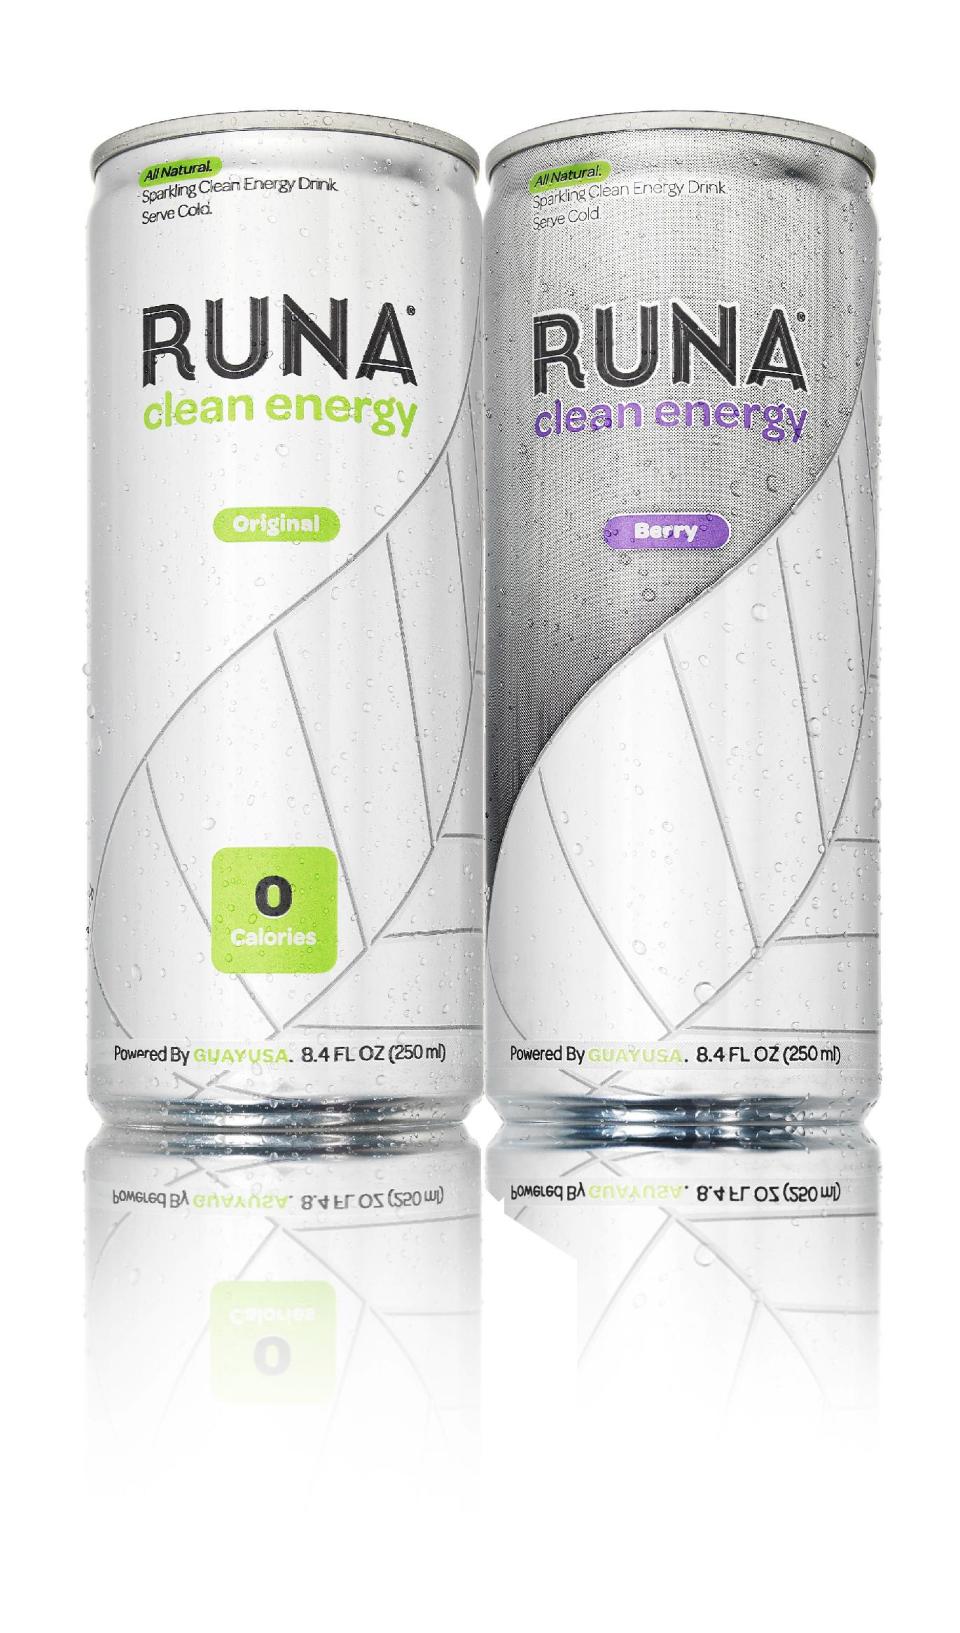 This undated publicity photo provided by courtesy of Runa shows cans of Runa energy drink, Original, left, and Berry. (AP Photo/Runa)